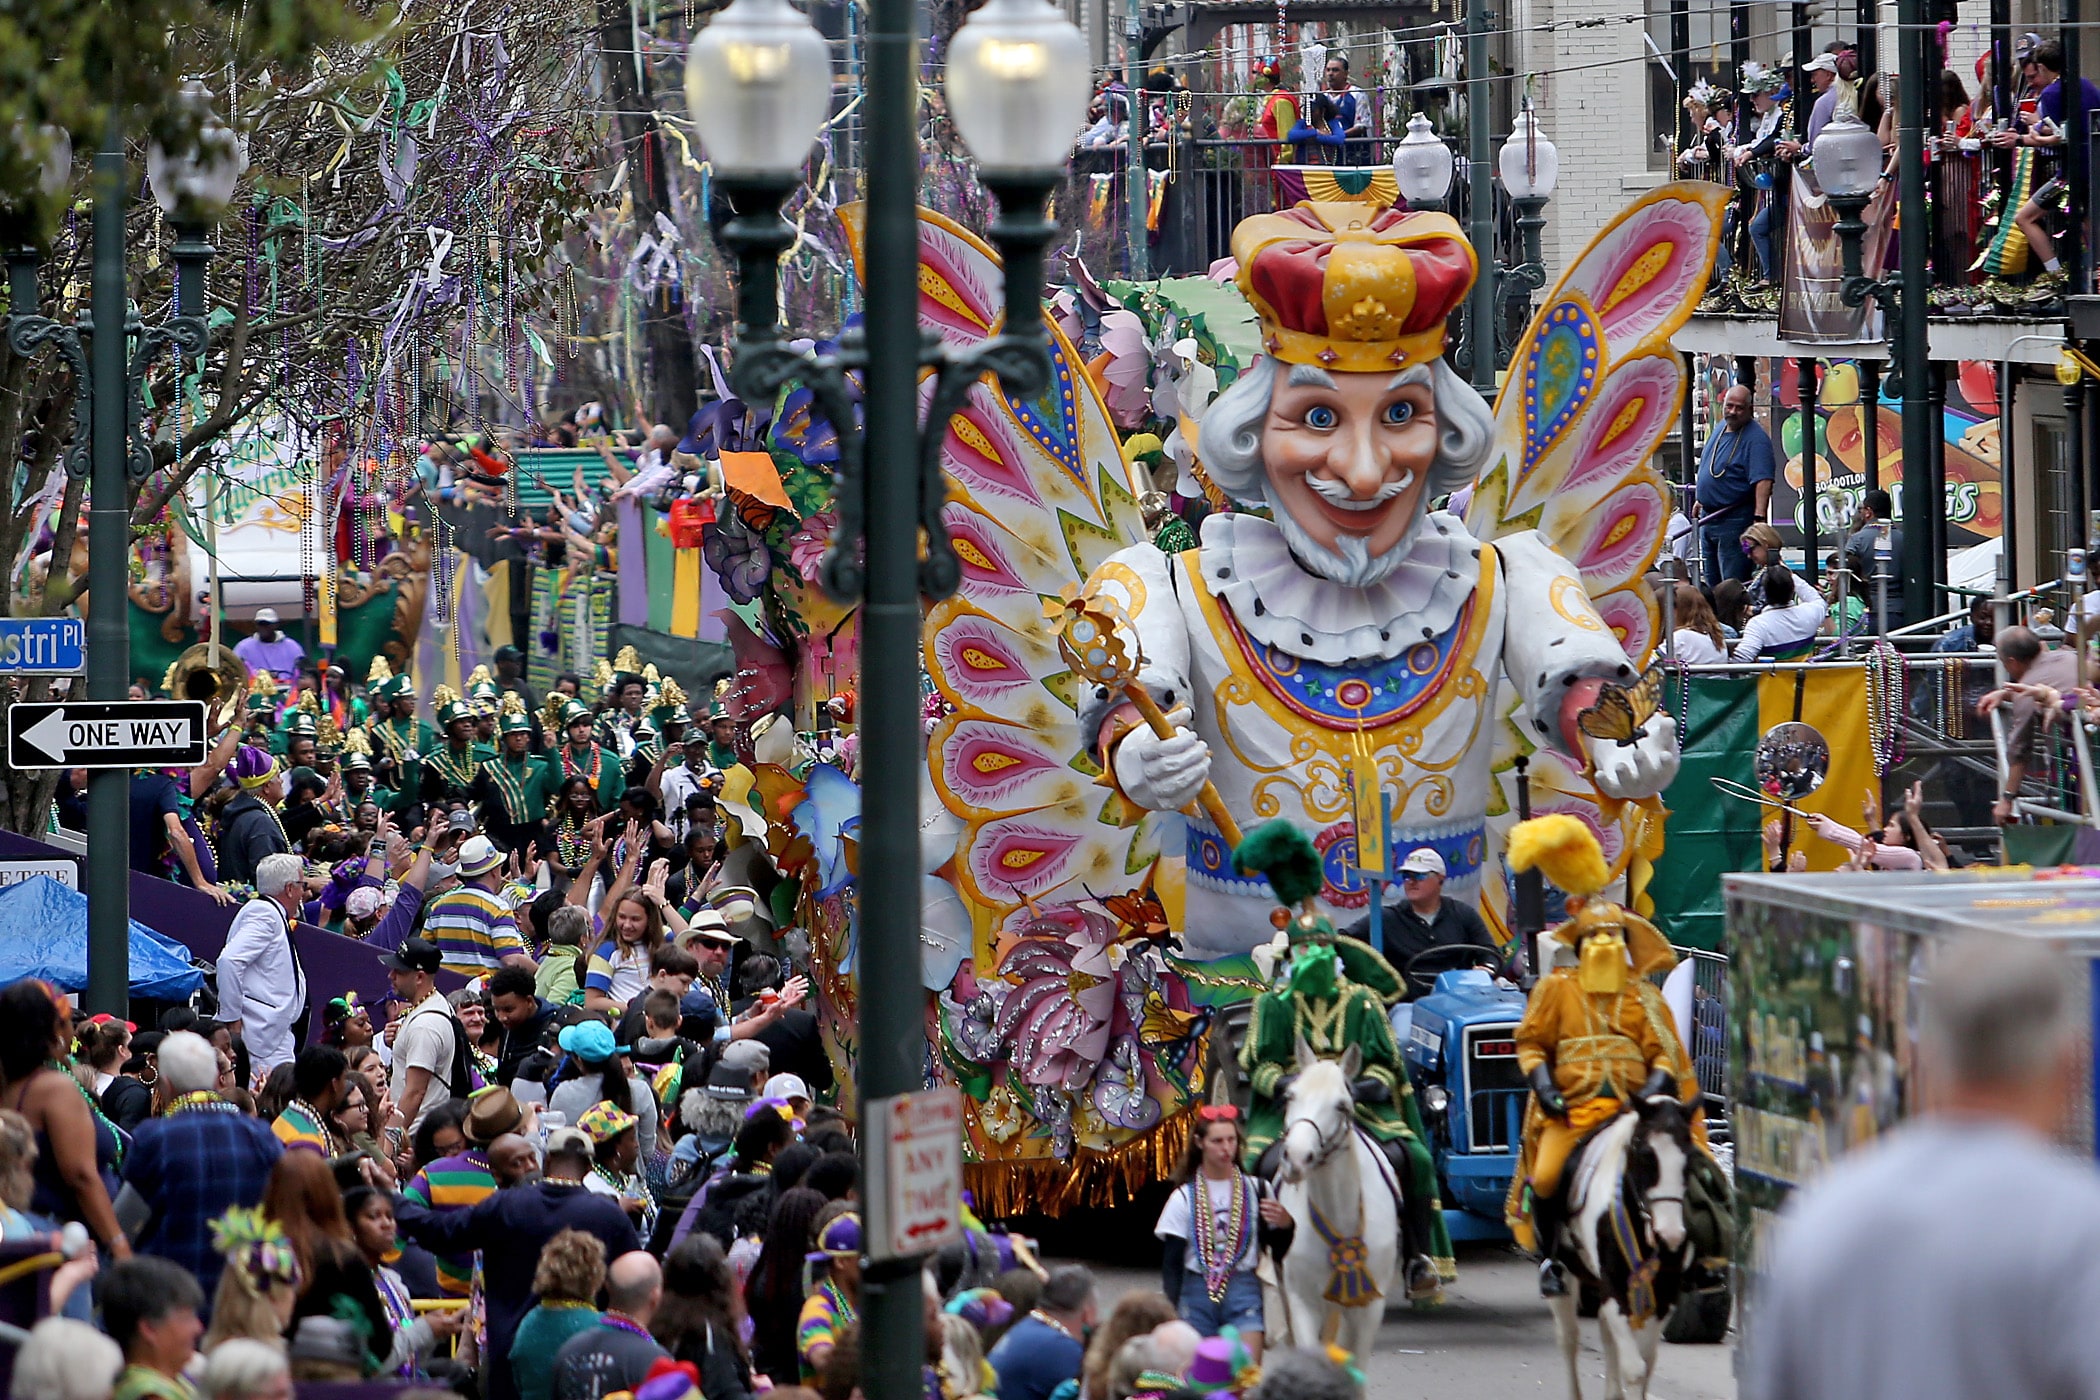 The Butterfly King float rolls on St. Charles Avenue as the 440 riders of Rex, King of Carnival, roll down the Uptown route on 26 floats with their 139th parade entitled “Omens and Auguries” on Mardi Gras Day, 2020. (Photo by Michael DeMocker)